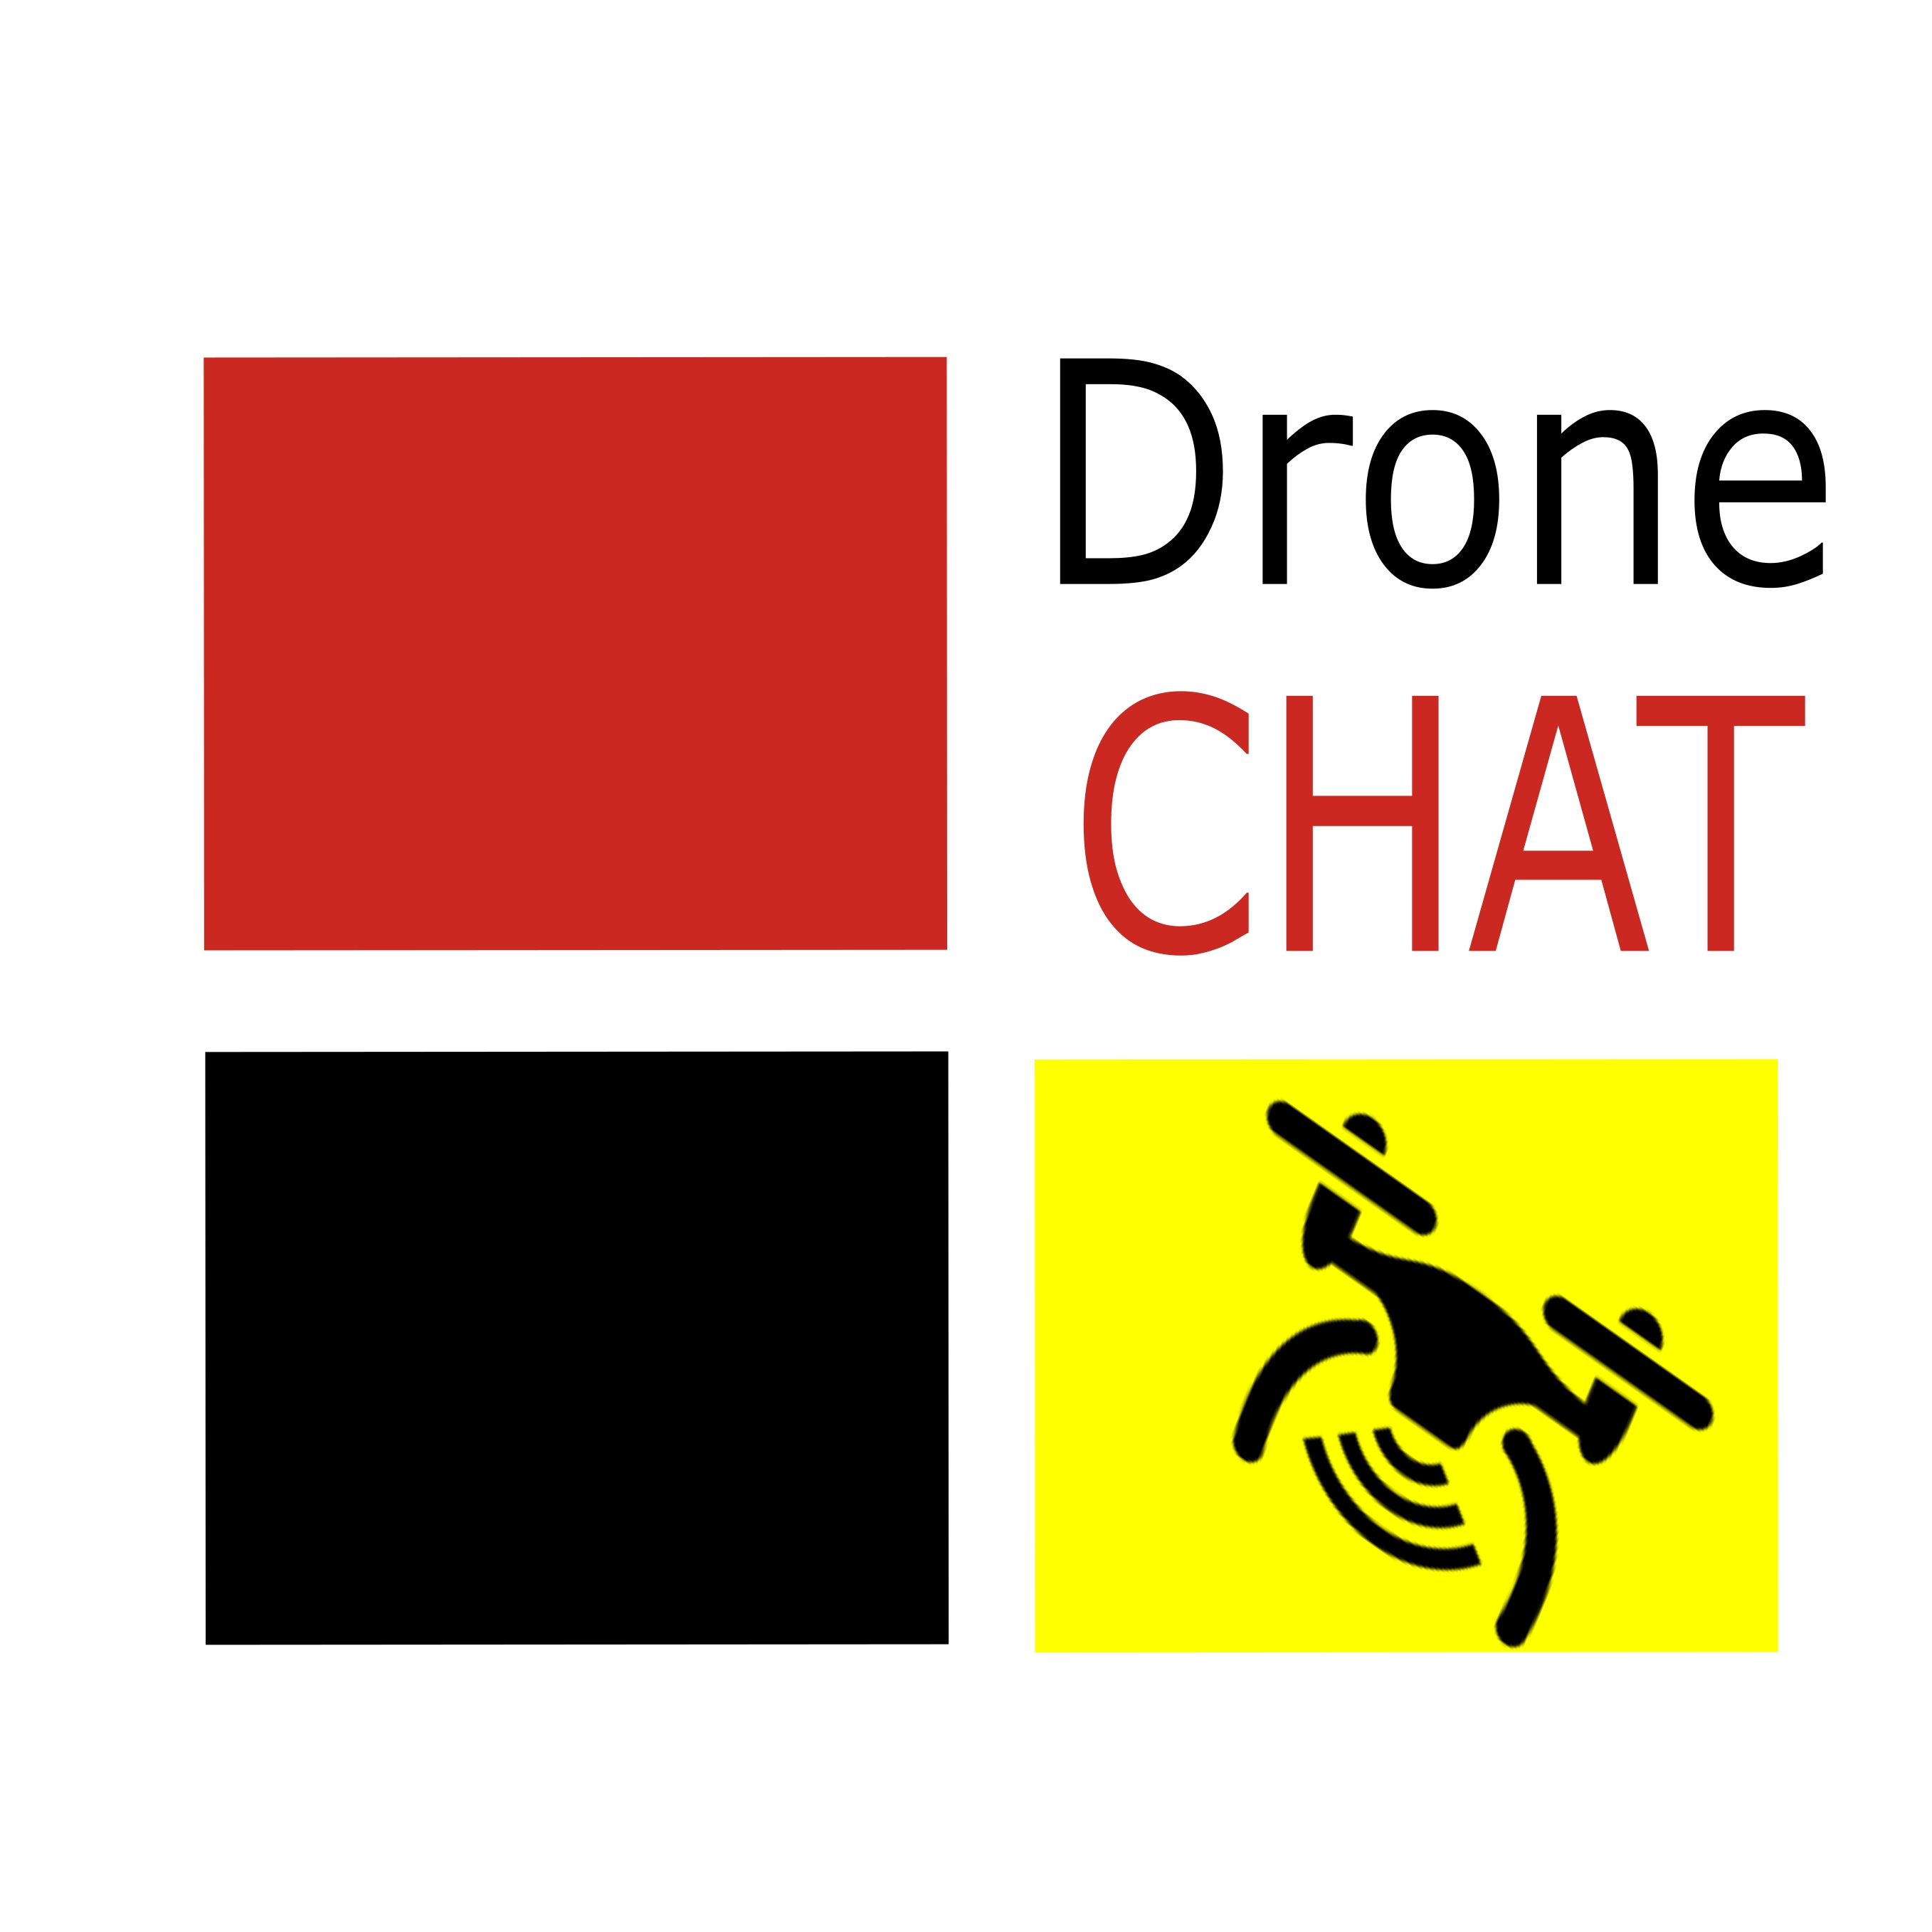 Phil Dunbabin talks about the creation of the Drone Flyers Facebook groups and other stuff!